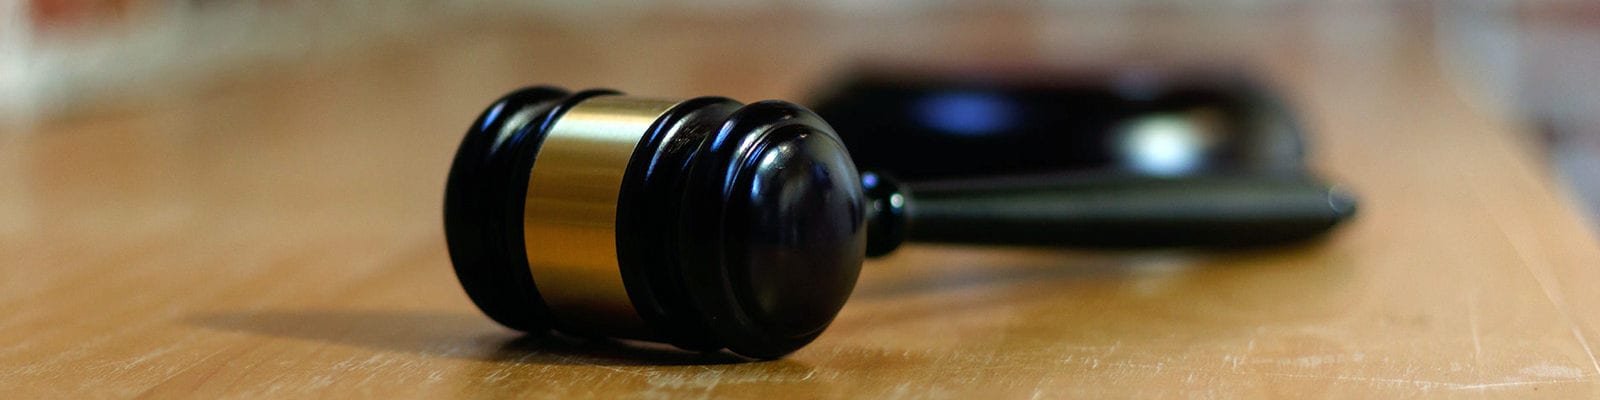 Photo of a judge's gavel lying on its side on a wooden surface.